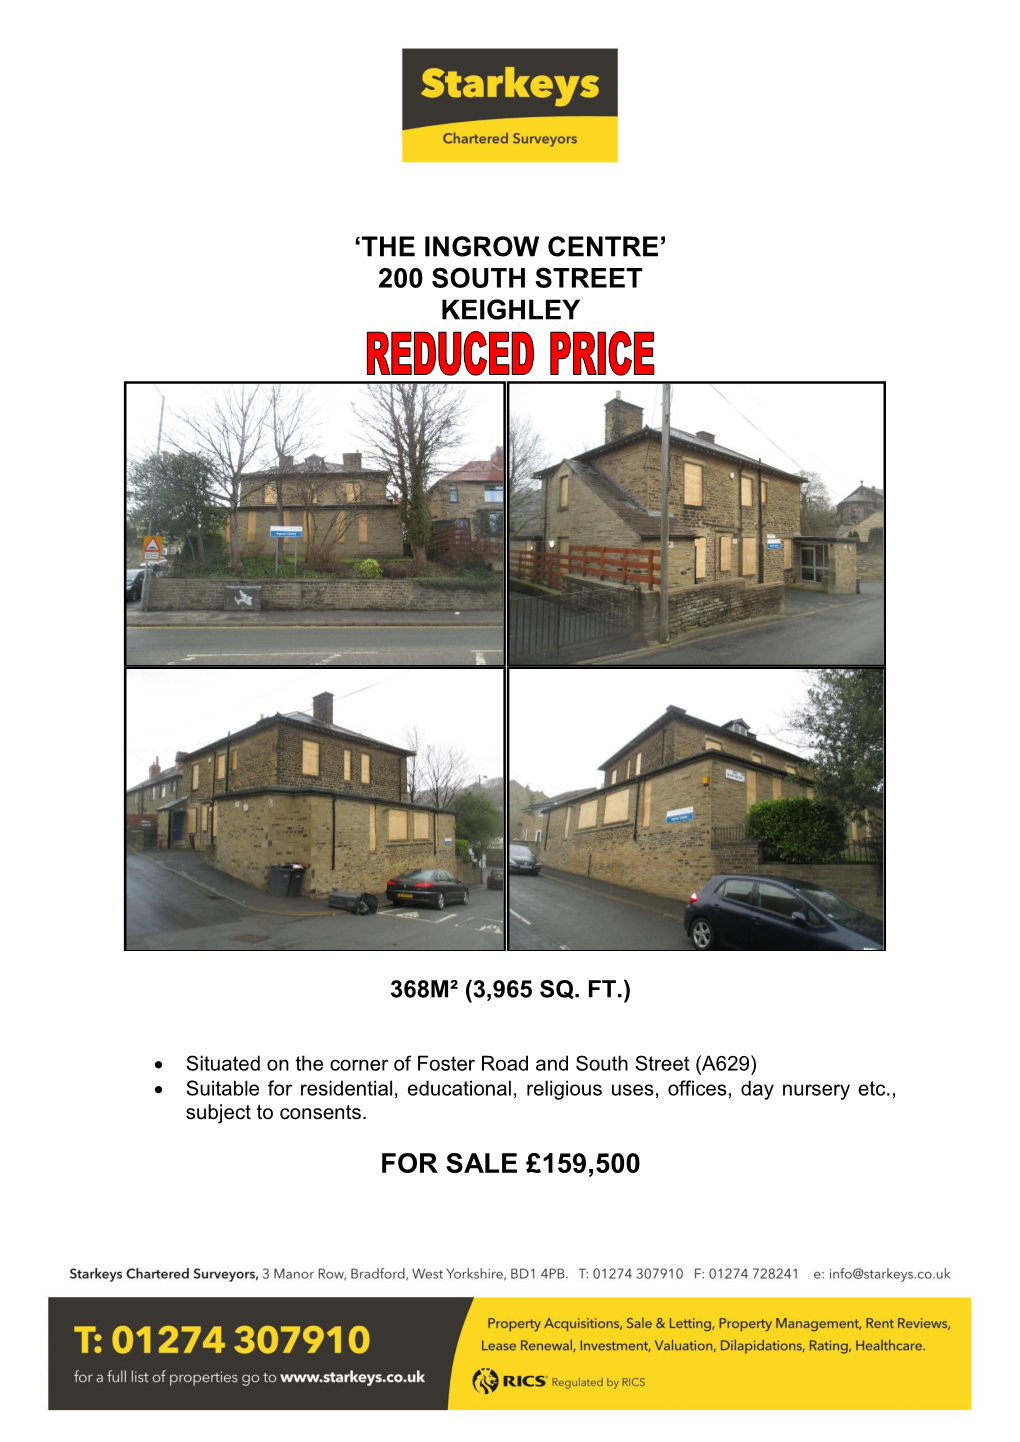 'The Ingrow Centre' 200 South Street Keighley for Sale